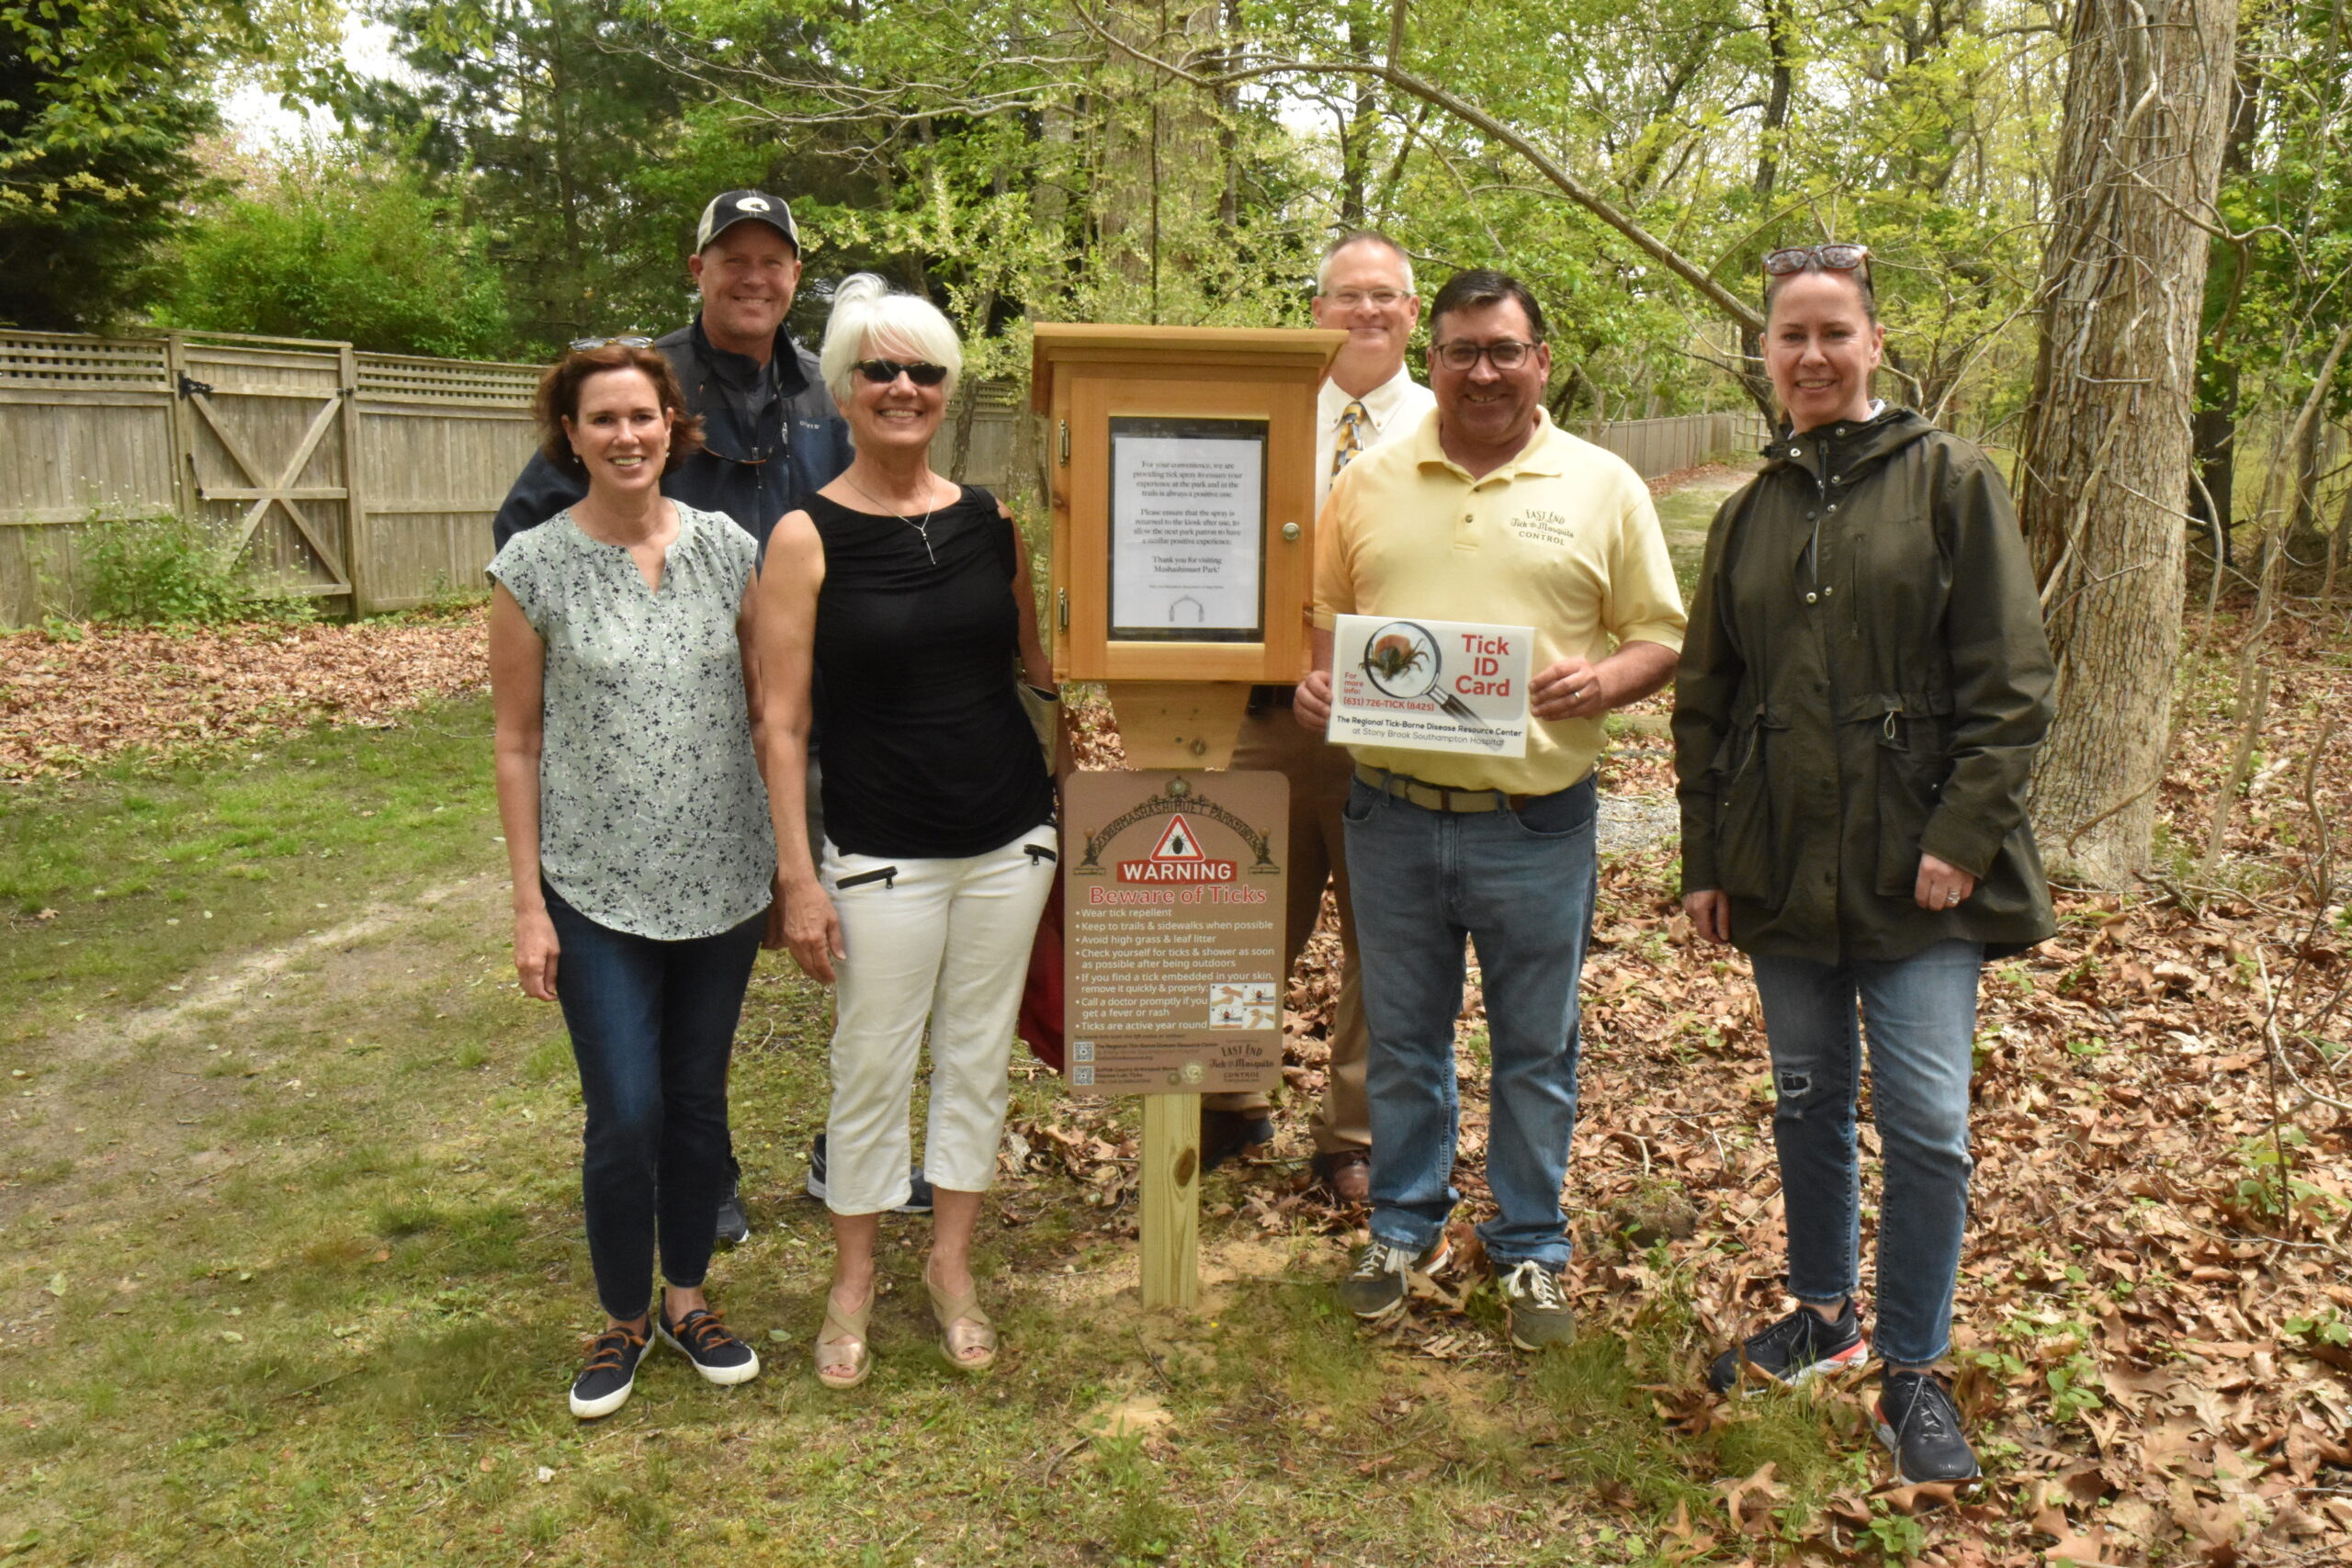 Mashashimuet Park board member Nancy Benvent; park manager Jeff Robinson; Rebecca Young of Stony Brook Southampton Hospital's Regional Tick-Borne Disease Resource Center; Scott Campbell, laboratory chief of Suffolk County's Arthropod-Borne Disease Laboratory; Brian Kelly of East End Tick and Mosquito Control and park board member Rachel Dee gathered in the park to unveil a tick awareness kiosk on Saturday, May 14.